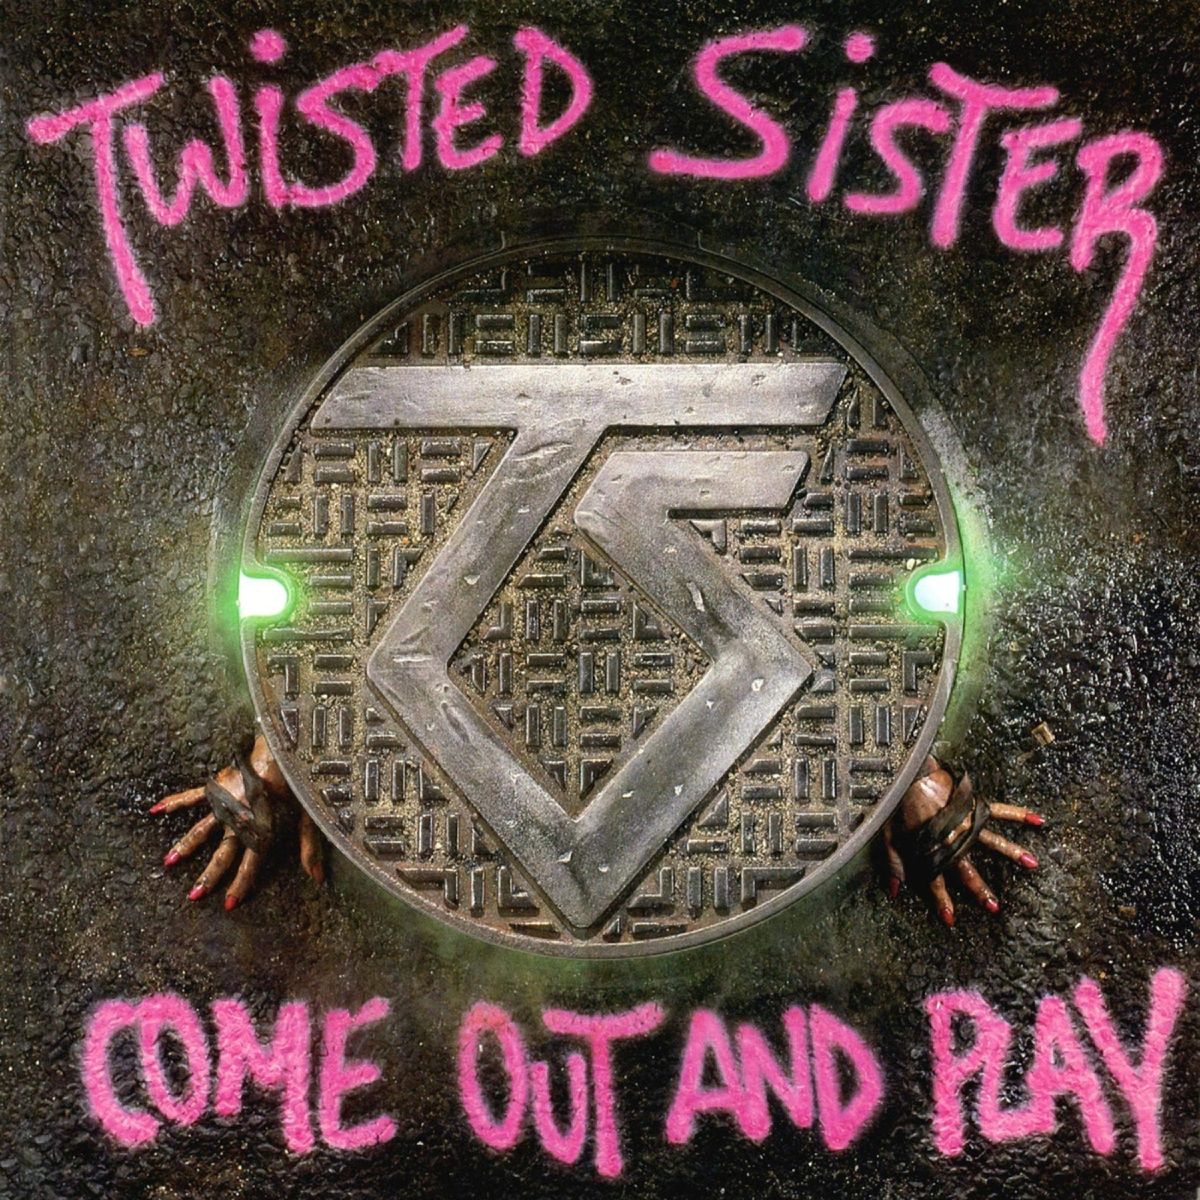 Portada del álbum 'Come Out and Play' de Twisted Sister